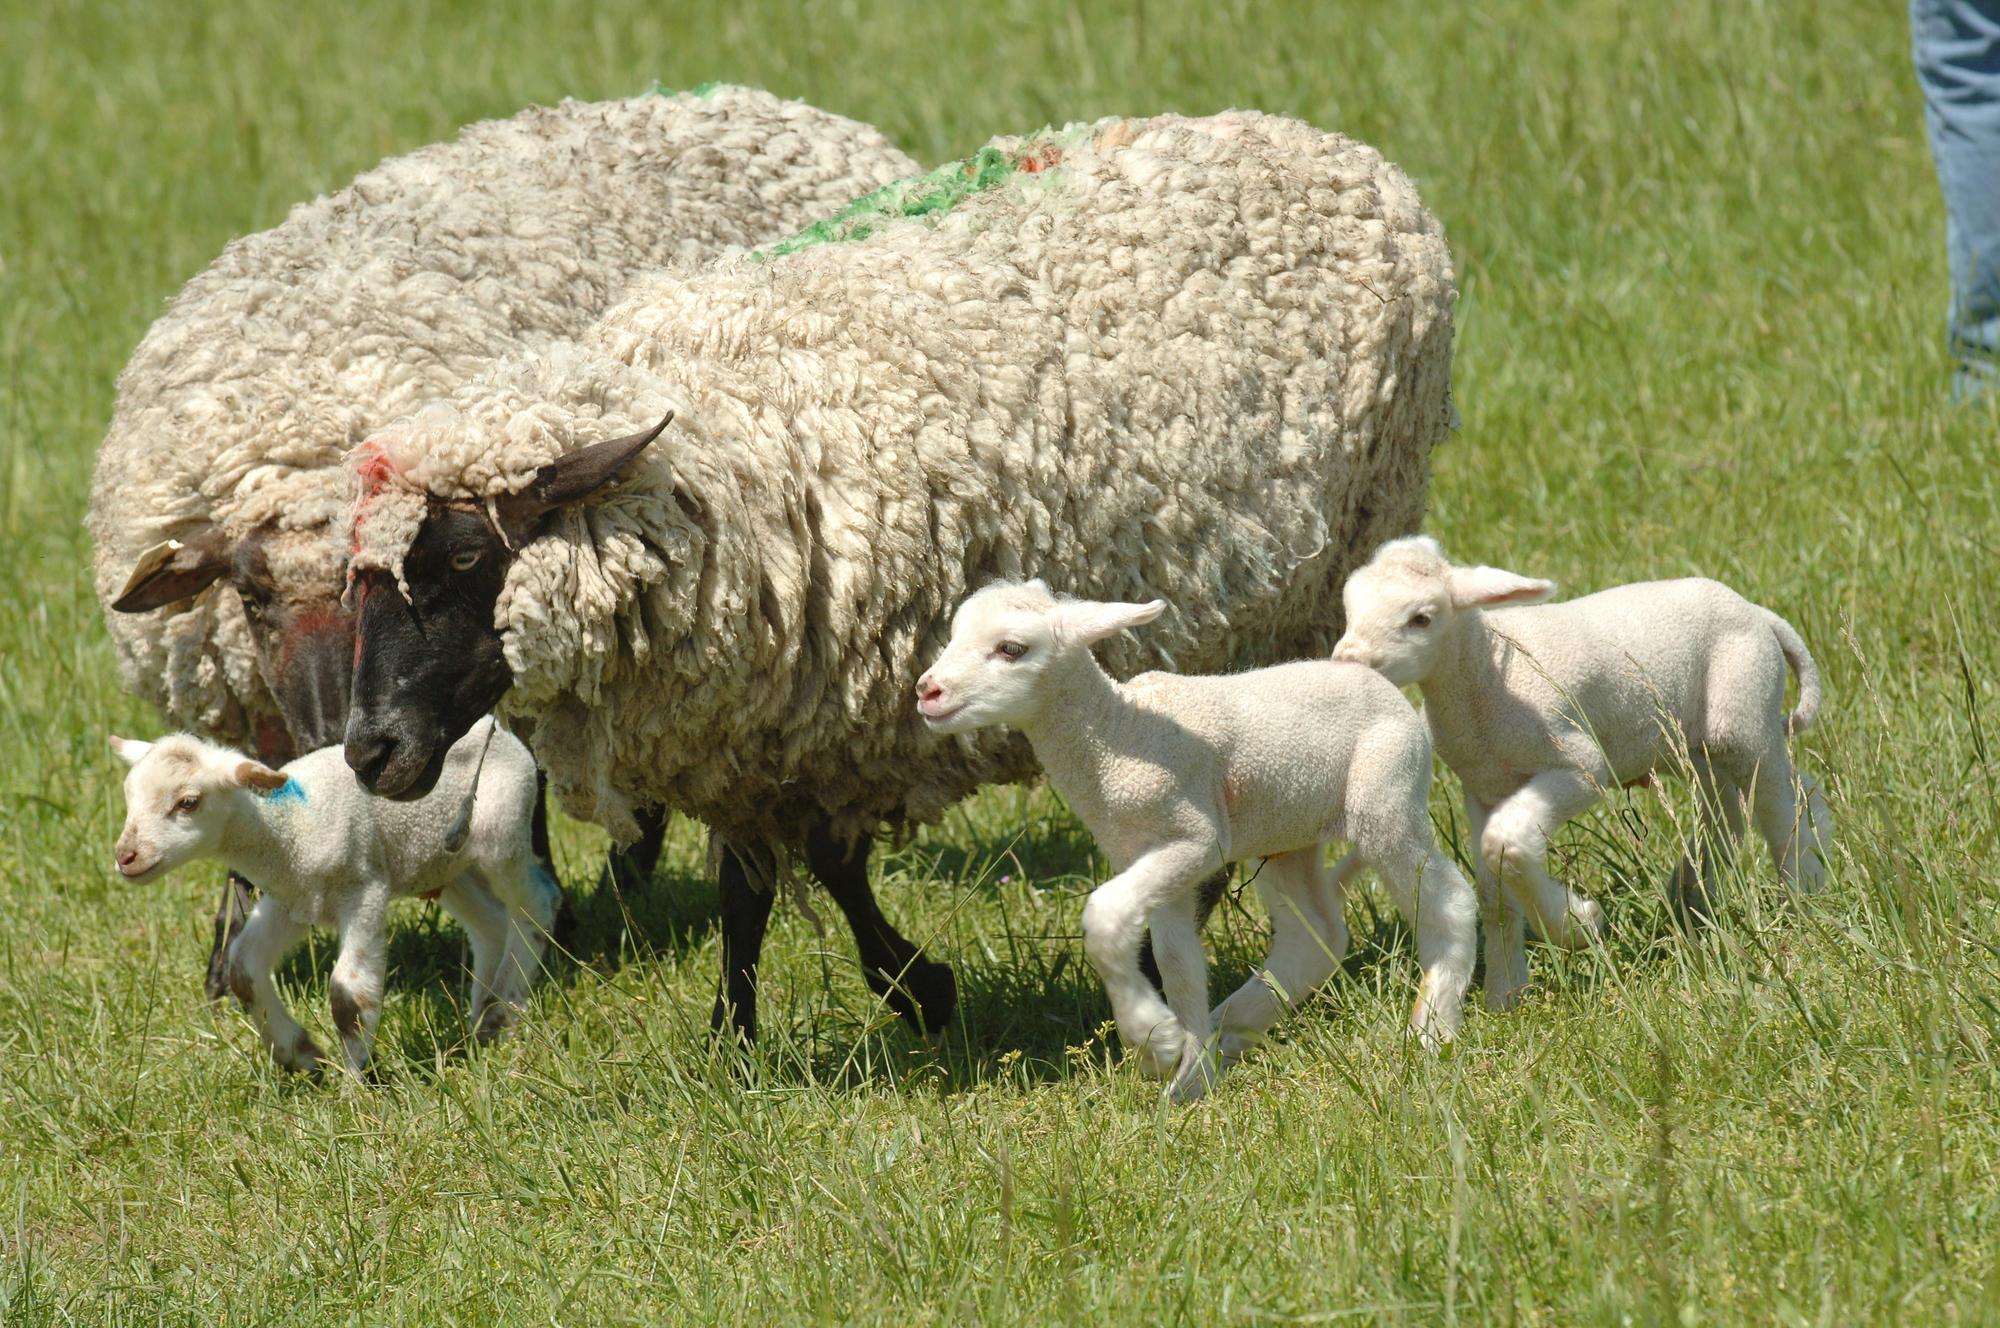 Two ewes and their lambs walk through a grassy pasture